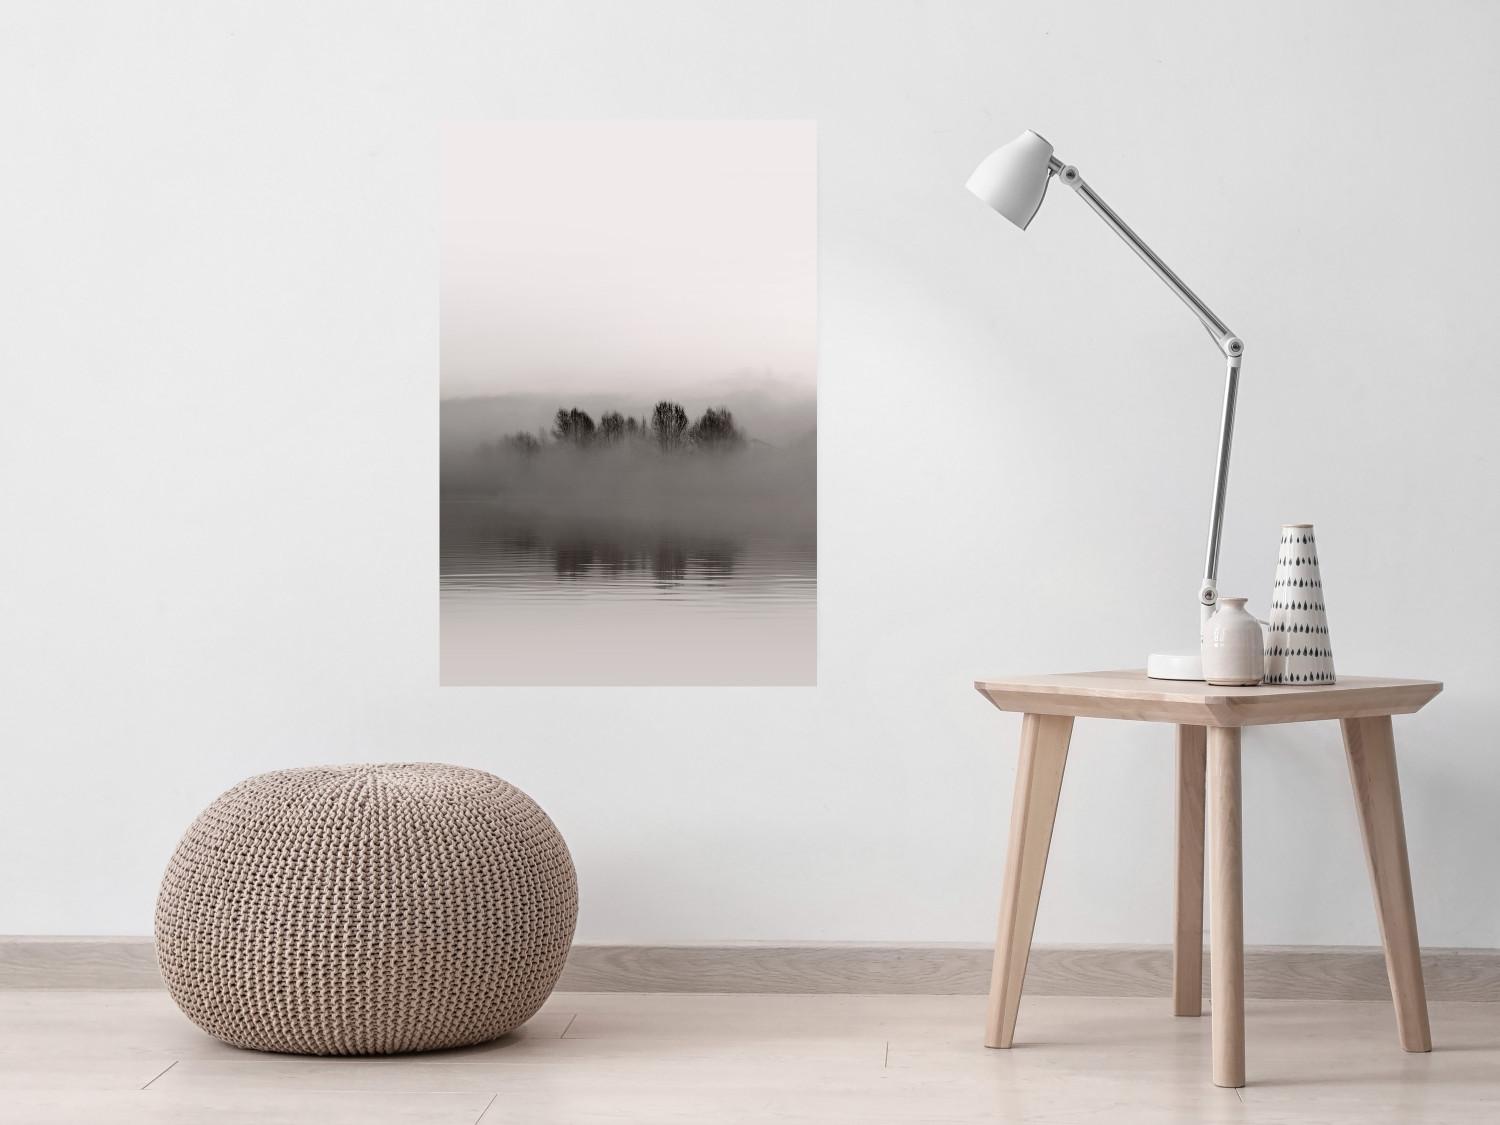 Poster Island of Mists - black and white lakeside landscape with mist-covered island